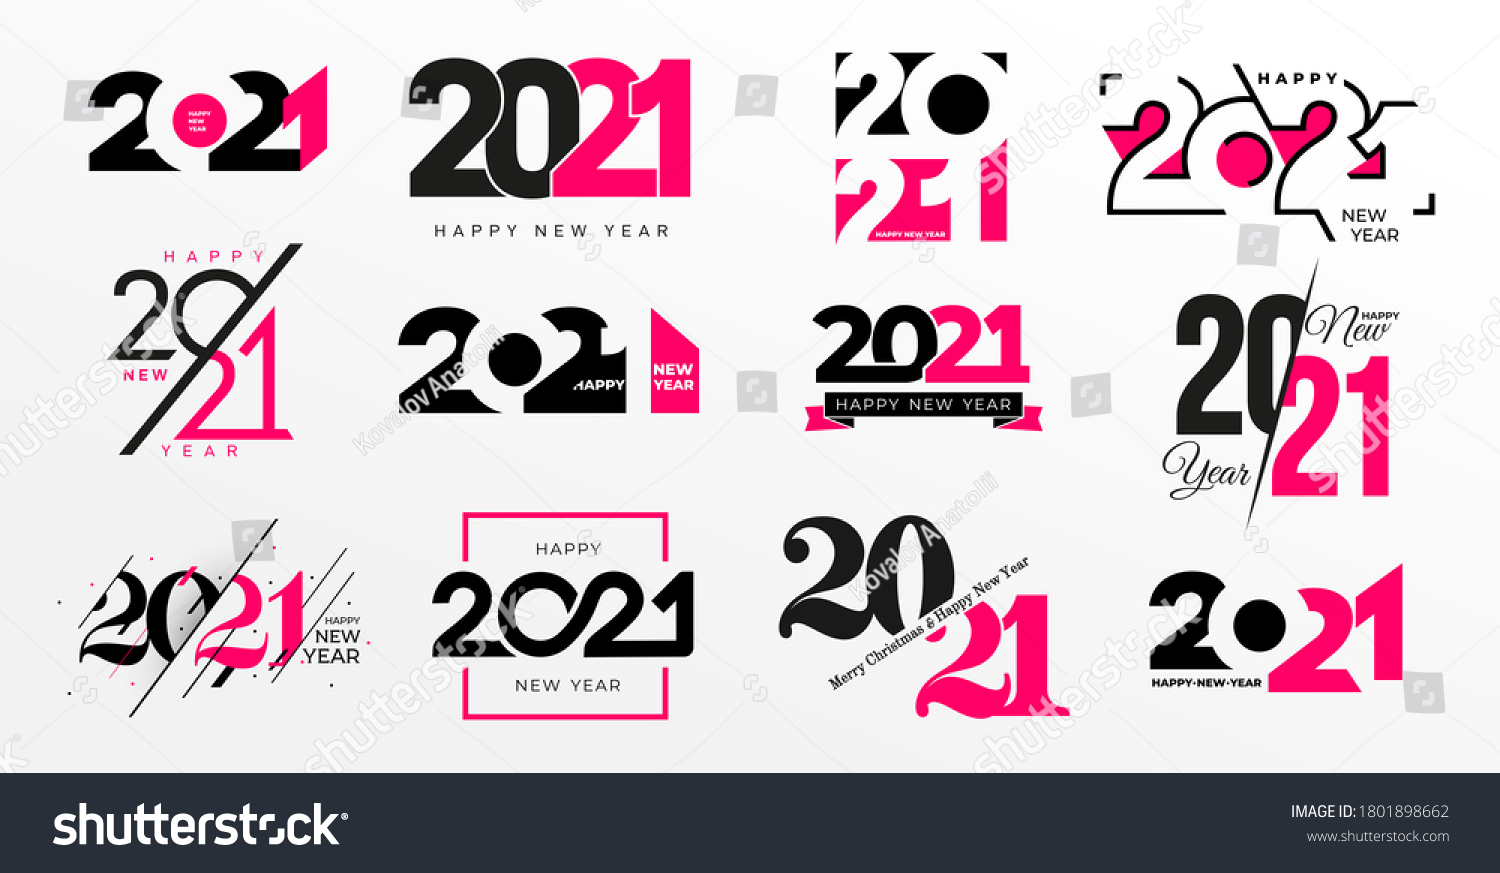 Big Collection of 2021 Happy New Year logo text design. 2021 number design template. Vector happy new year symbols with pink and black labels isolated on white background. Greeting card template. #1801898662